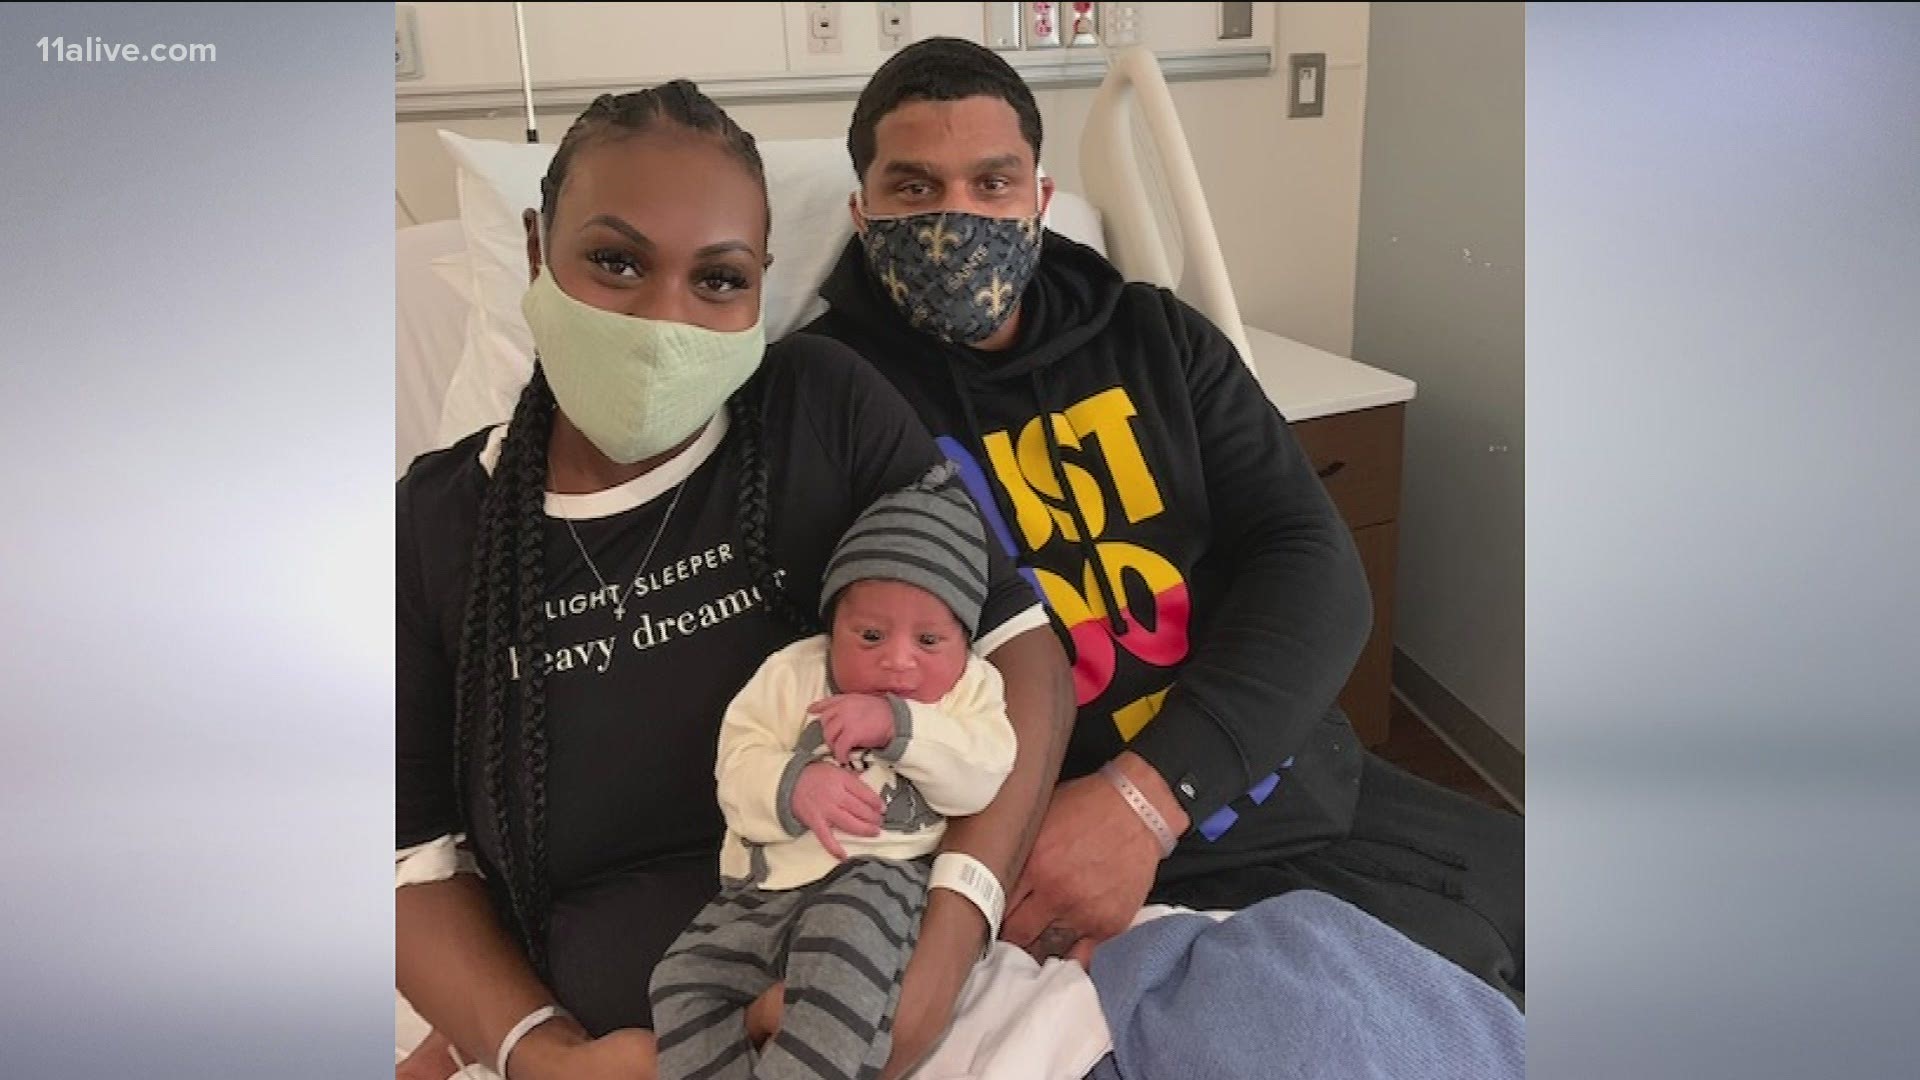 Baby boy Jonah arrived at Emory University Hospital Midtown at 12:06 a.m., according to spokesperson Janet Christenbury.